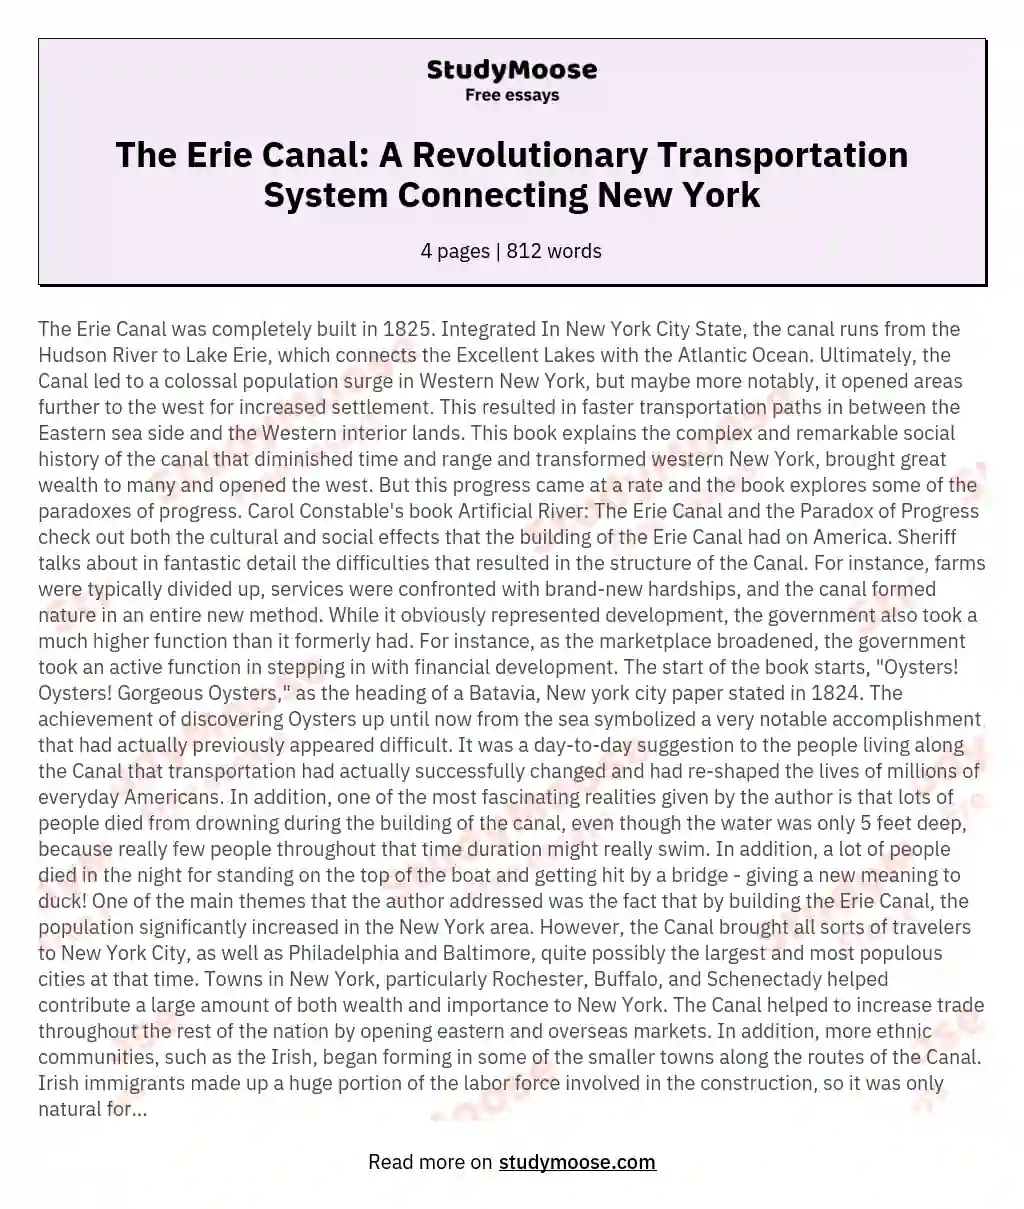 The Erie Canal: A Revolutionary Transportation System Connecting New York essay